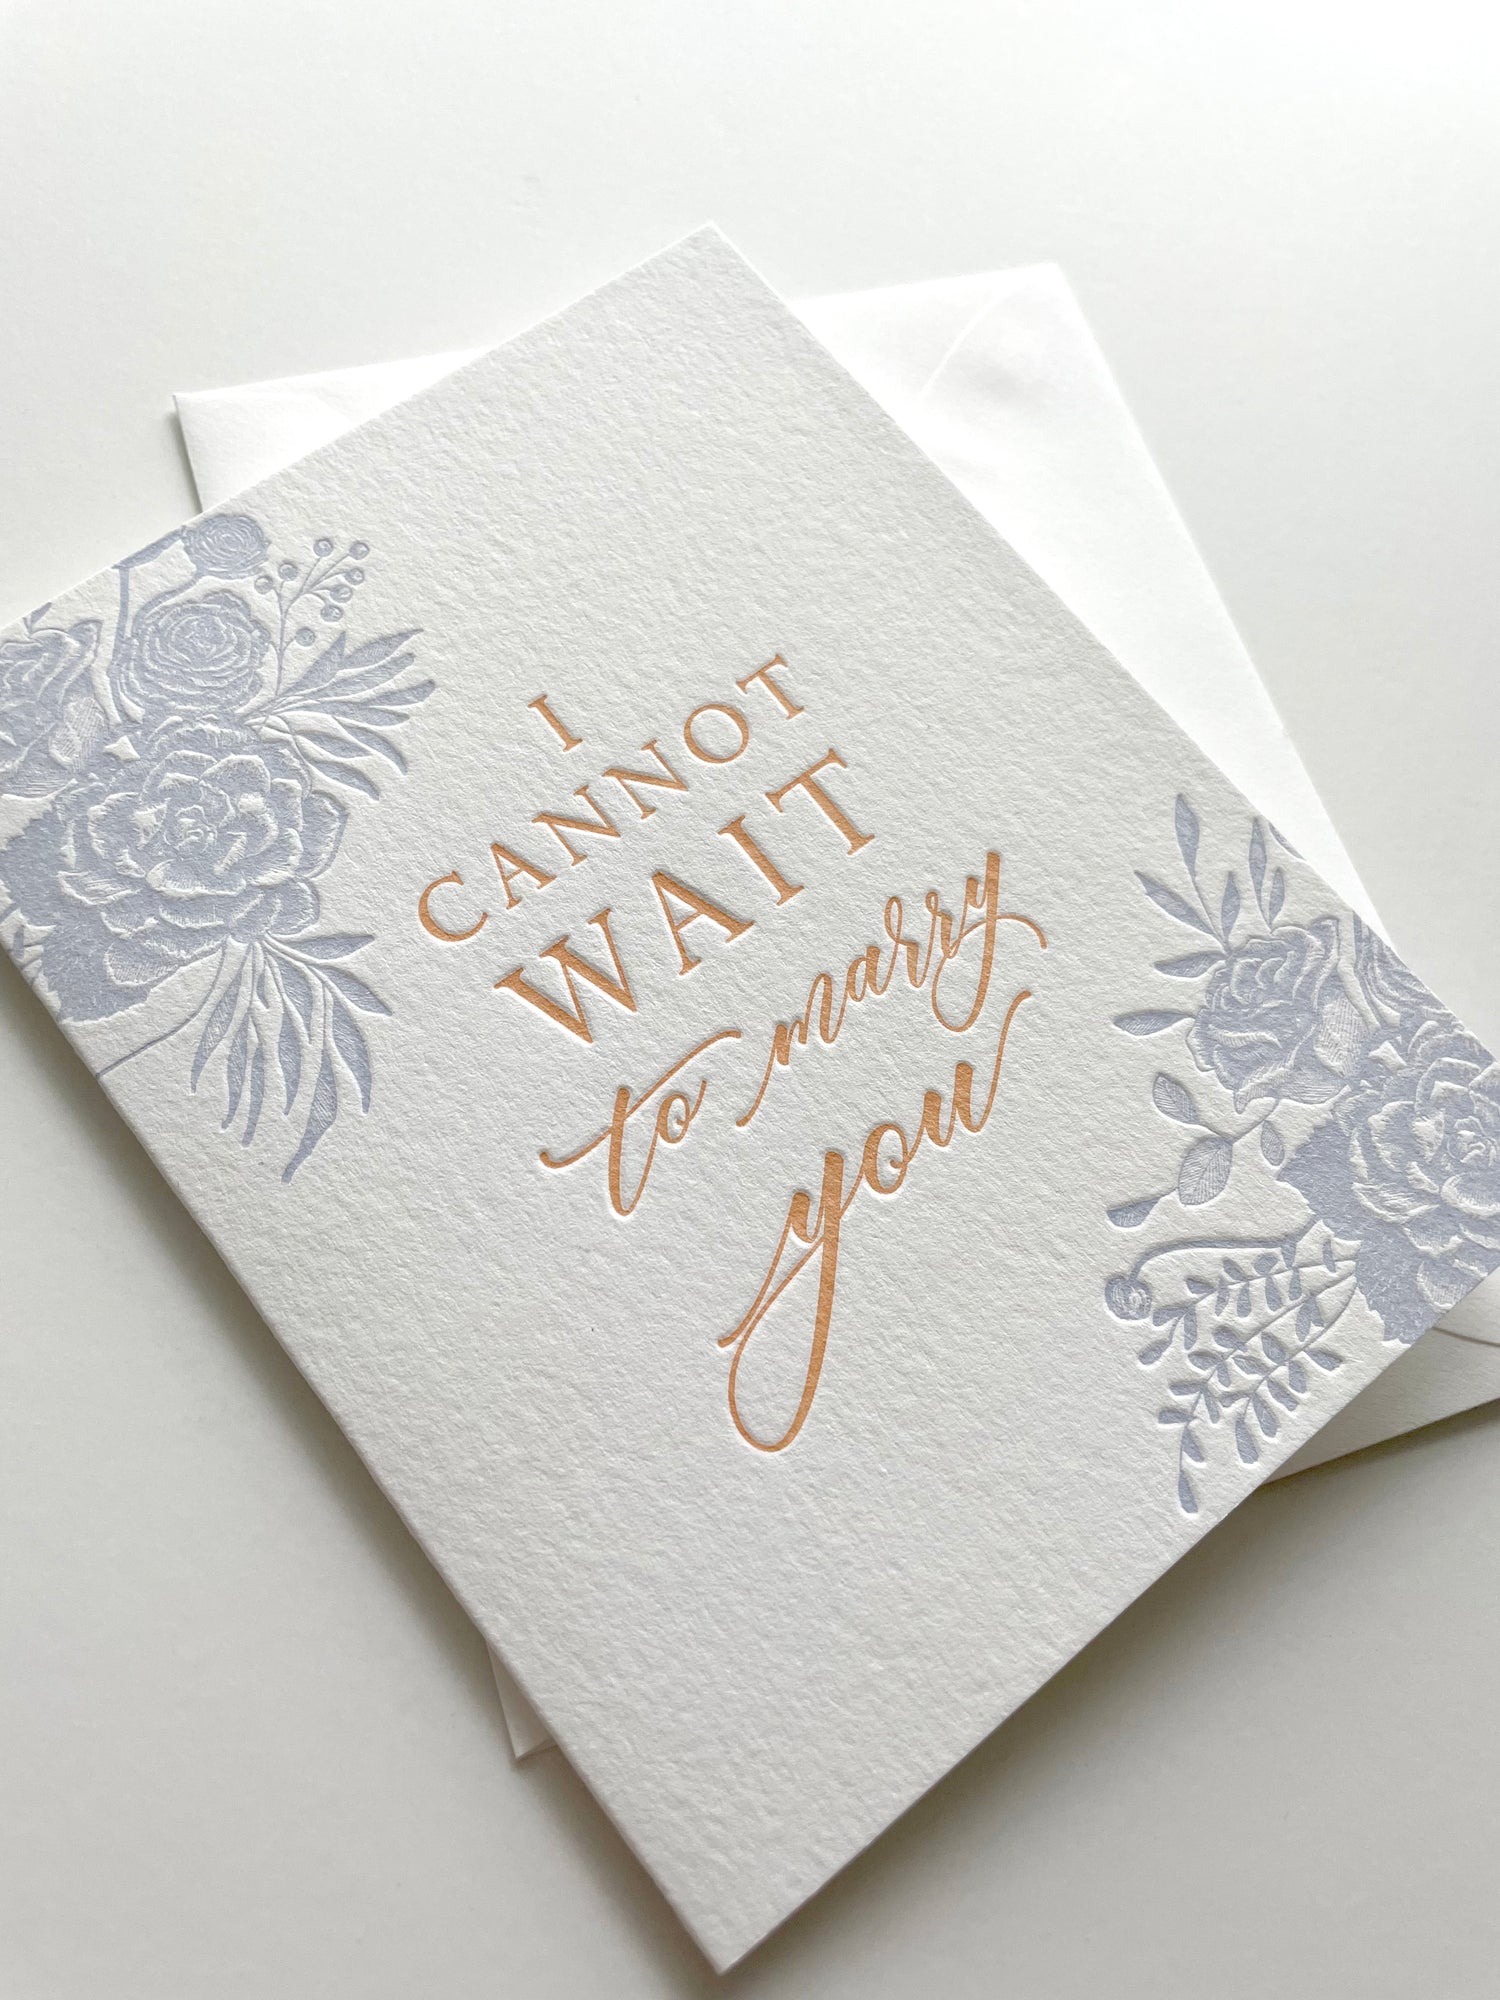 Rust Belt Love letterpress greeting card that reads I cannot wait to marry you